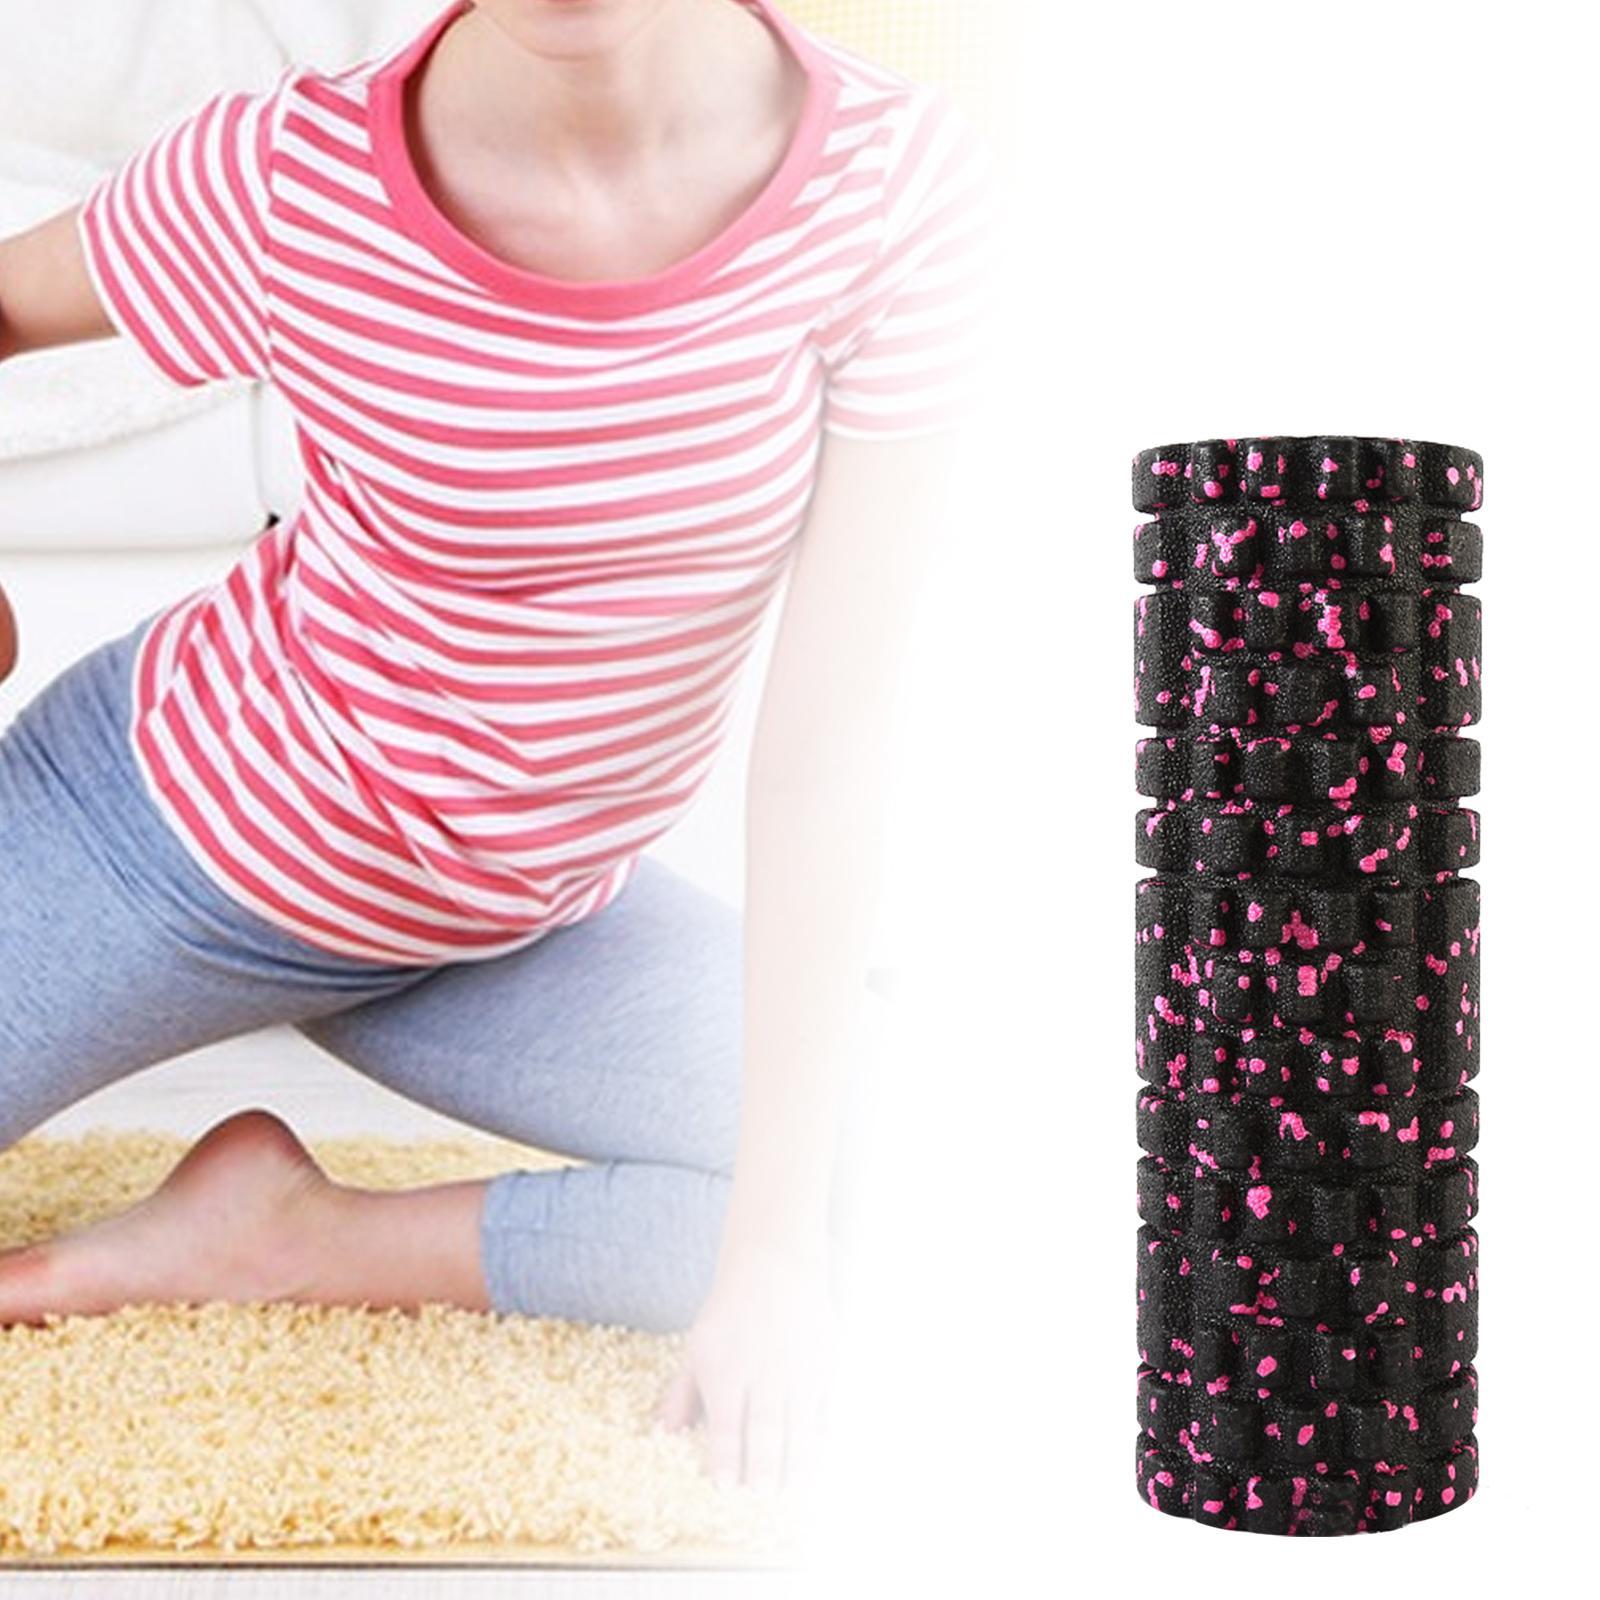 Foam Roller ,Speckled Foam Rollers, Extra Firm Premium, High Density Round Foam Roller Yoga Column for Workout Arm Pilates ,Stretching Fitness